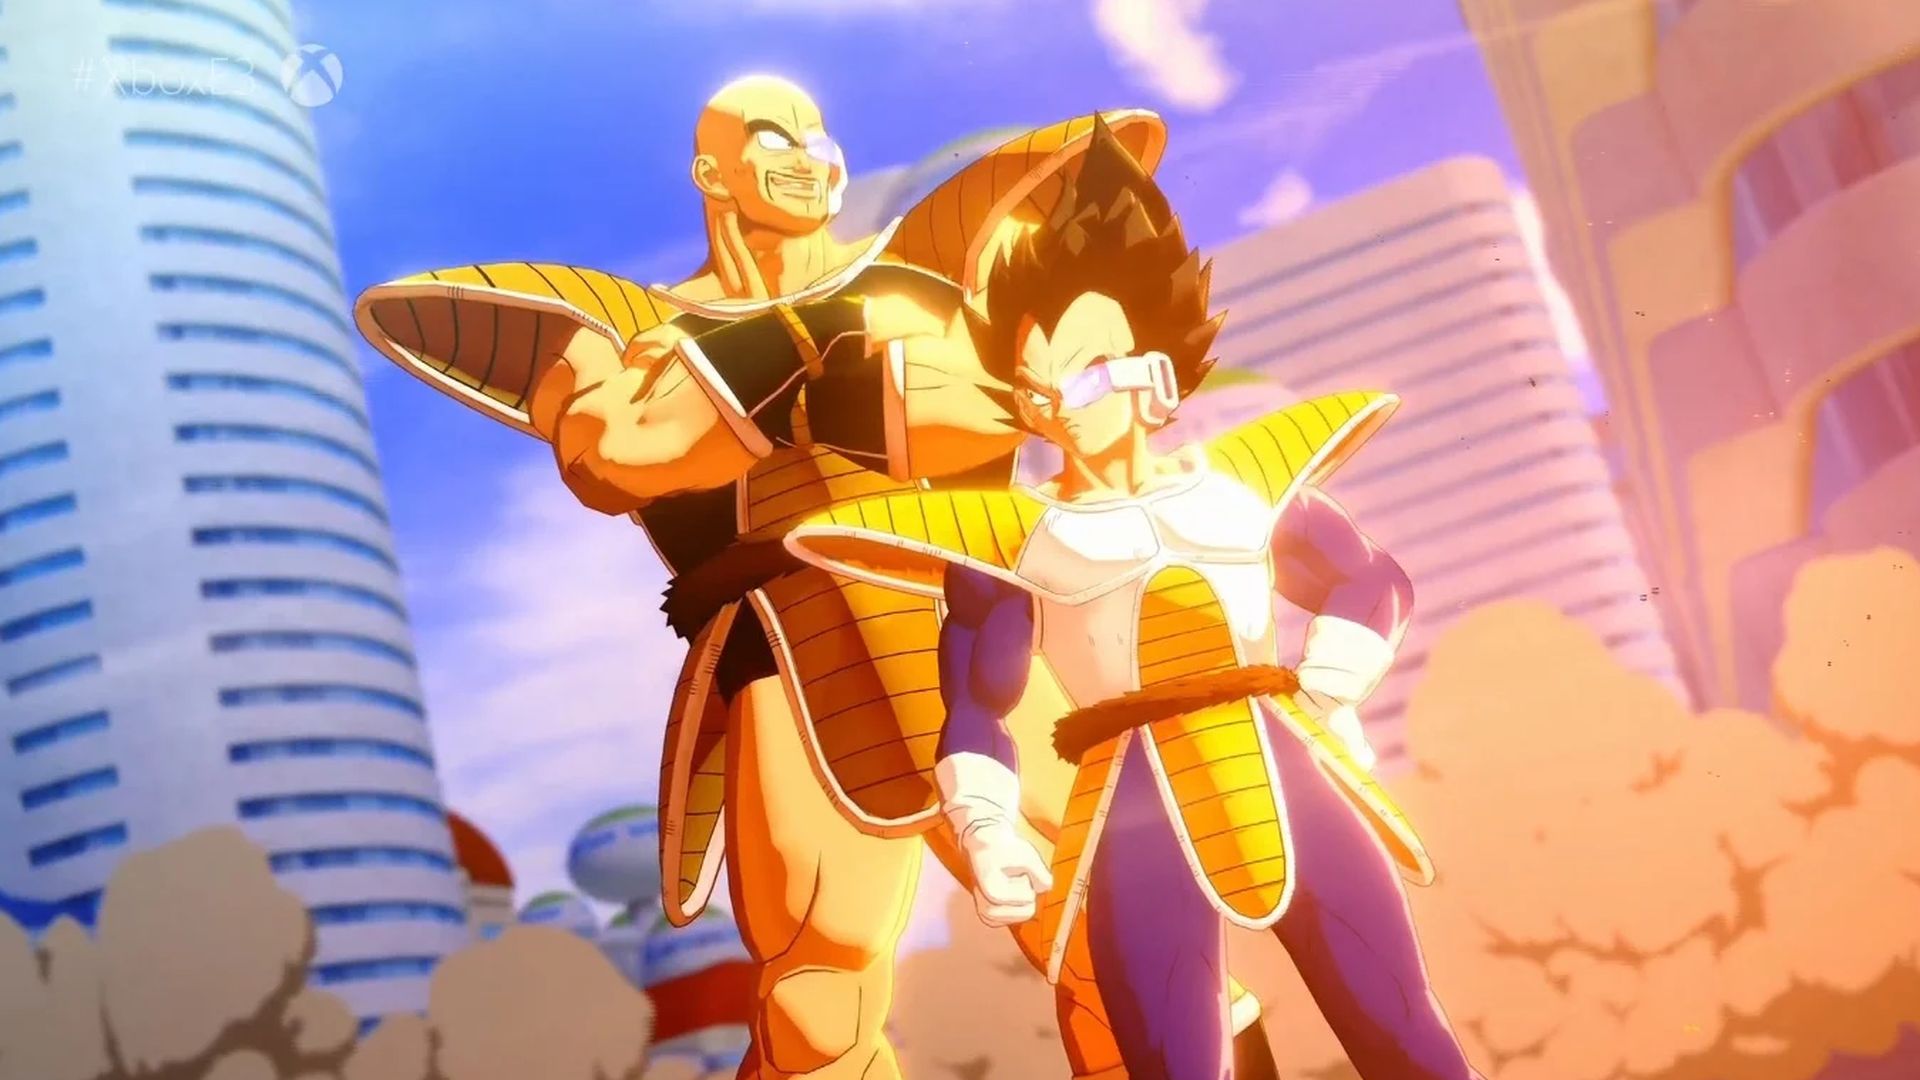 Dragon Ball Z Kakarot Will Feature Character Interactions Not In Original Story